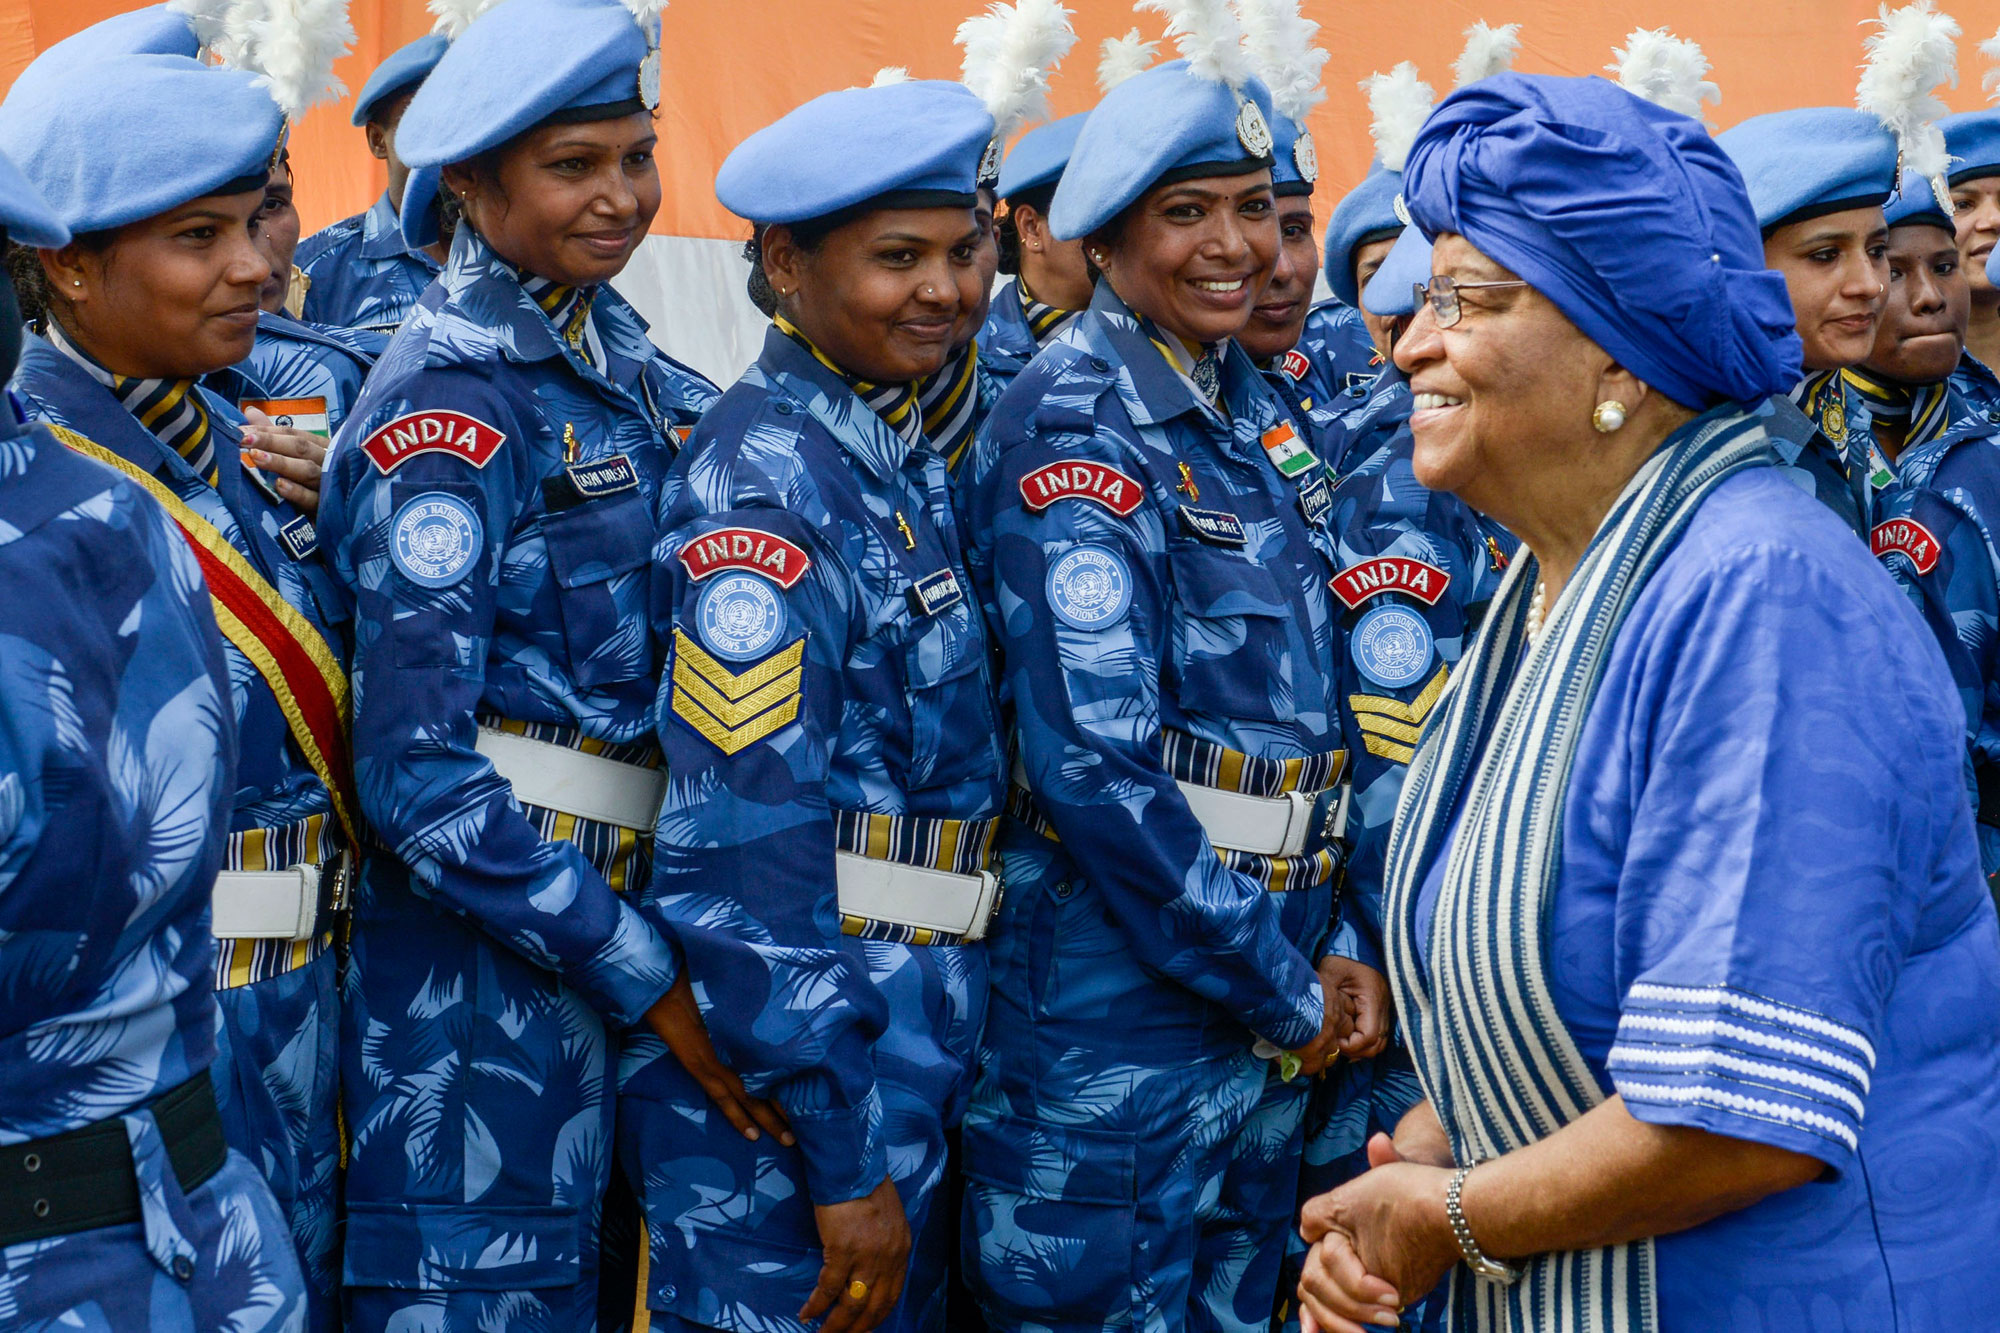 President Ellen Johnson-Sirleaf (left) with members of the all-female Indian Formed Police Unit serving with the UN Mission in Liberia in February 2016. Photo: Emmanuel Tobey/UNMIL